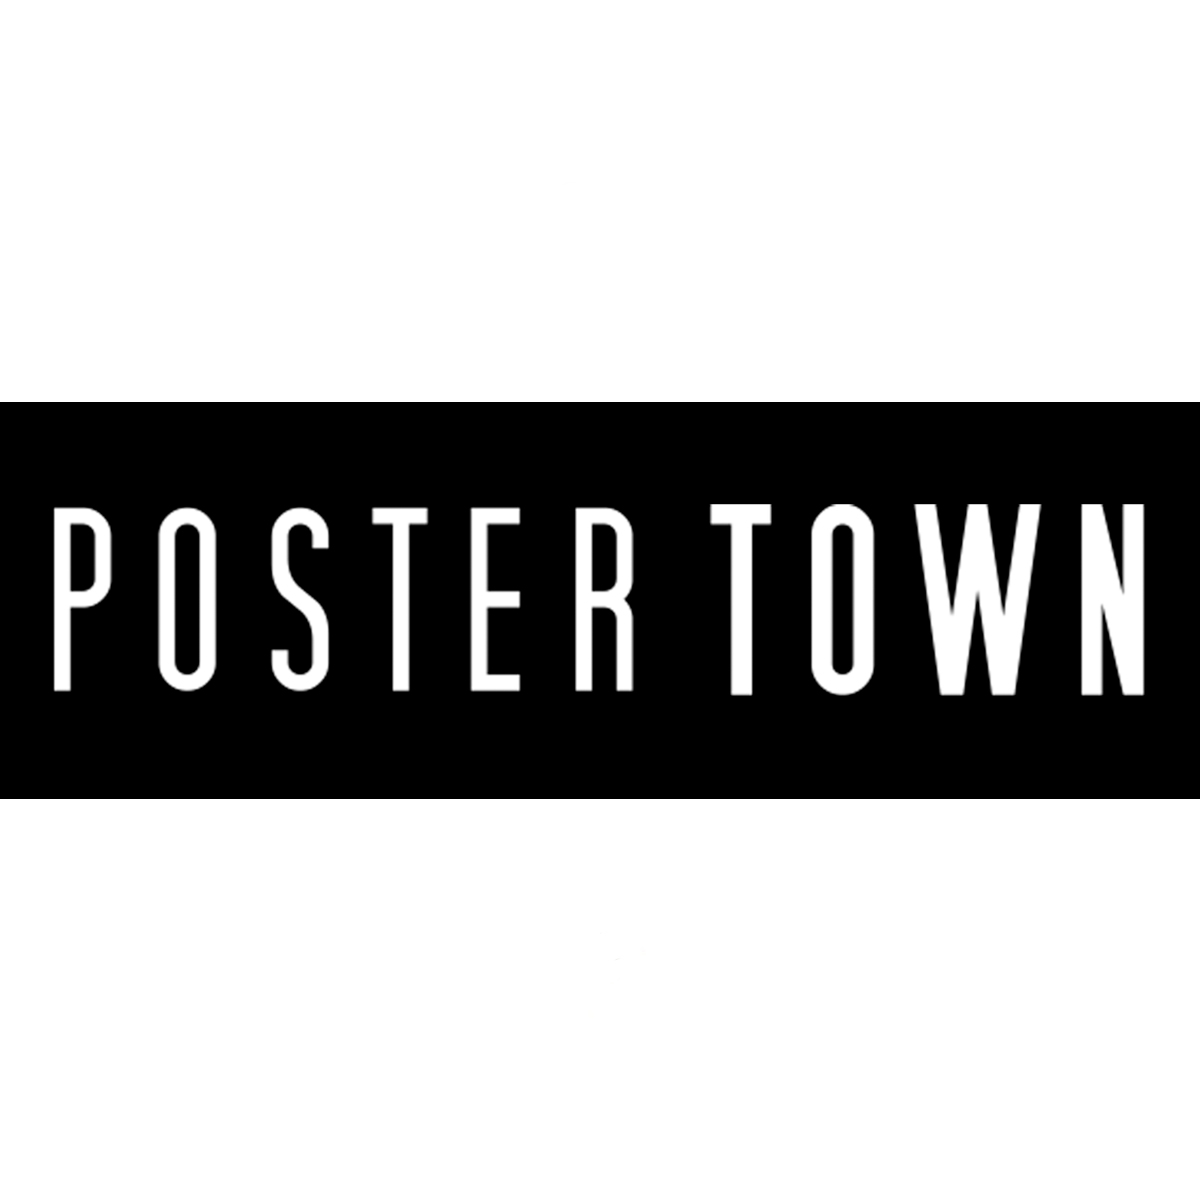 POSTER TOWN